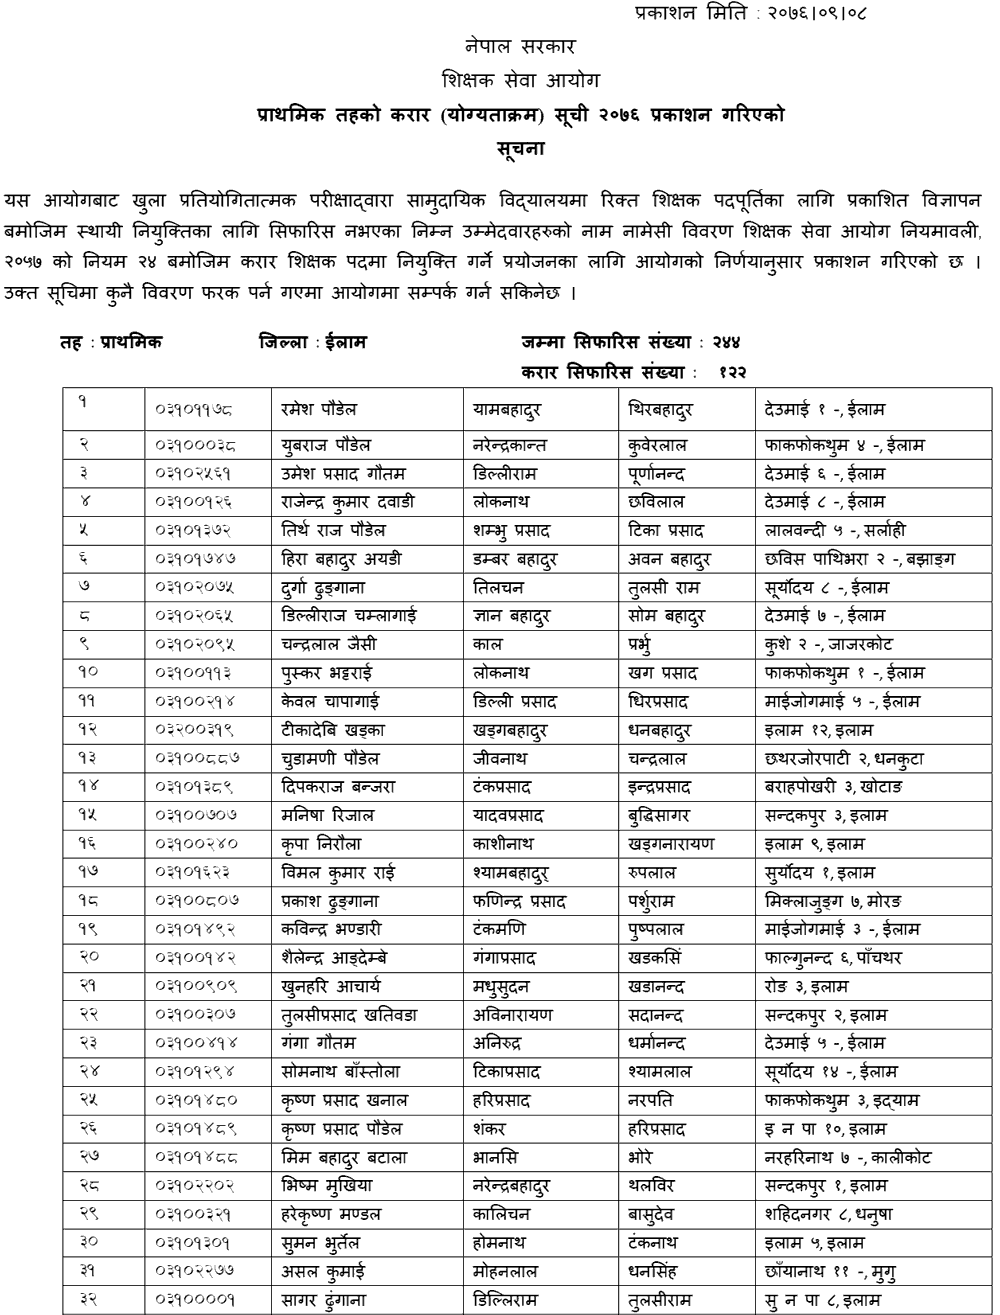 TSC Published Primary Level Contract List of Ilam